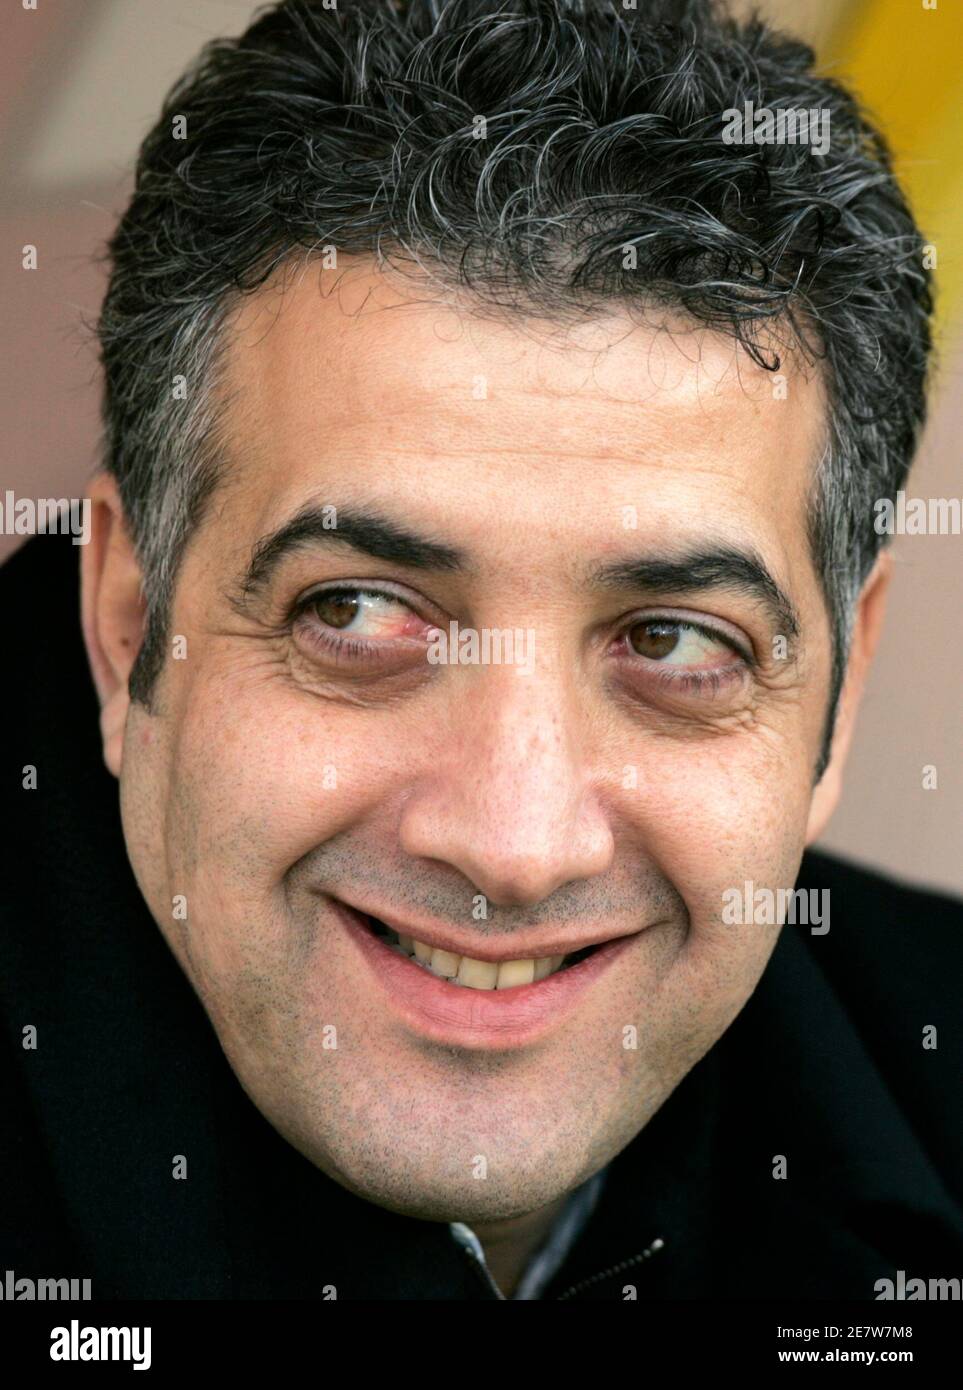 The new Olympique de Marseille football soccer club owner, Canadian  businessman Jack Kachkar, smiles during their French Ligue 1 soccer match  in Le Mans January 27, 2007. REUTERS/Daniel Joubert (FRANCE Stock Photo -  Alamy